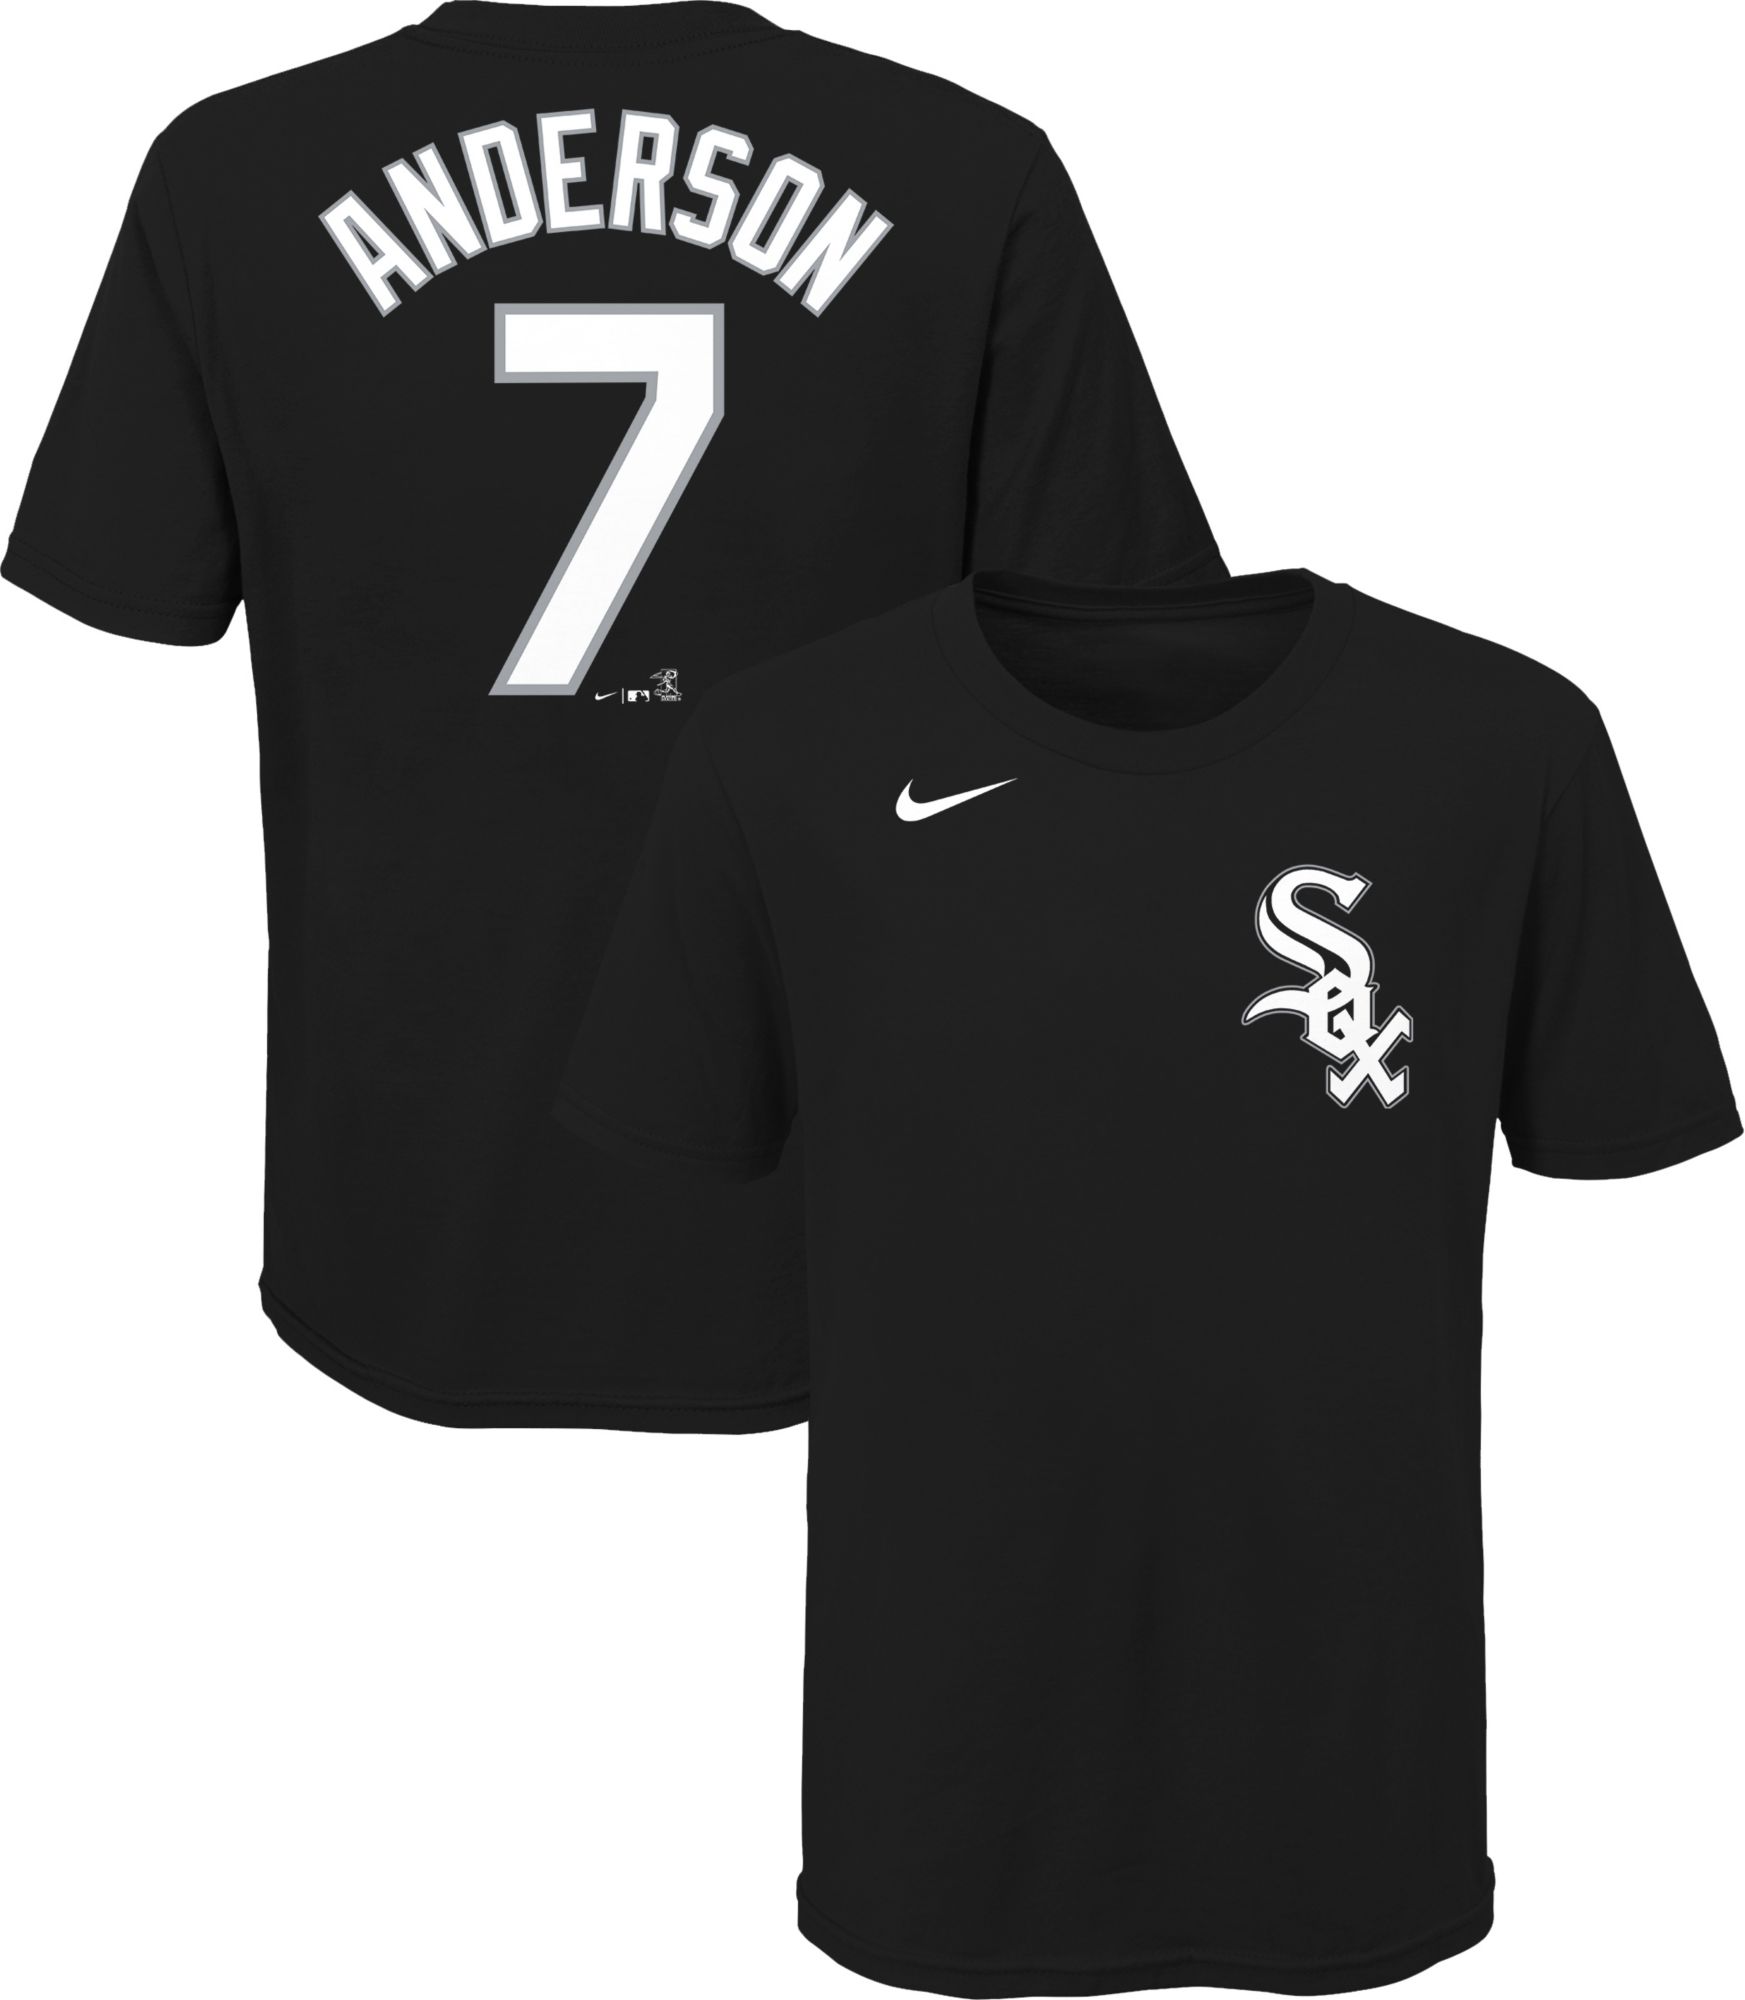 tim anderson white sox jersey